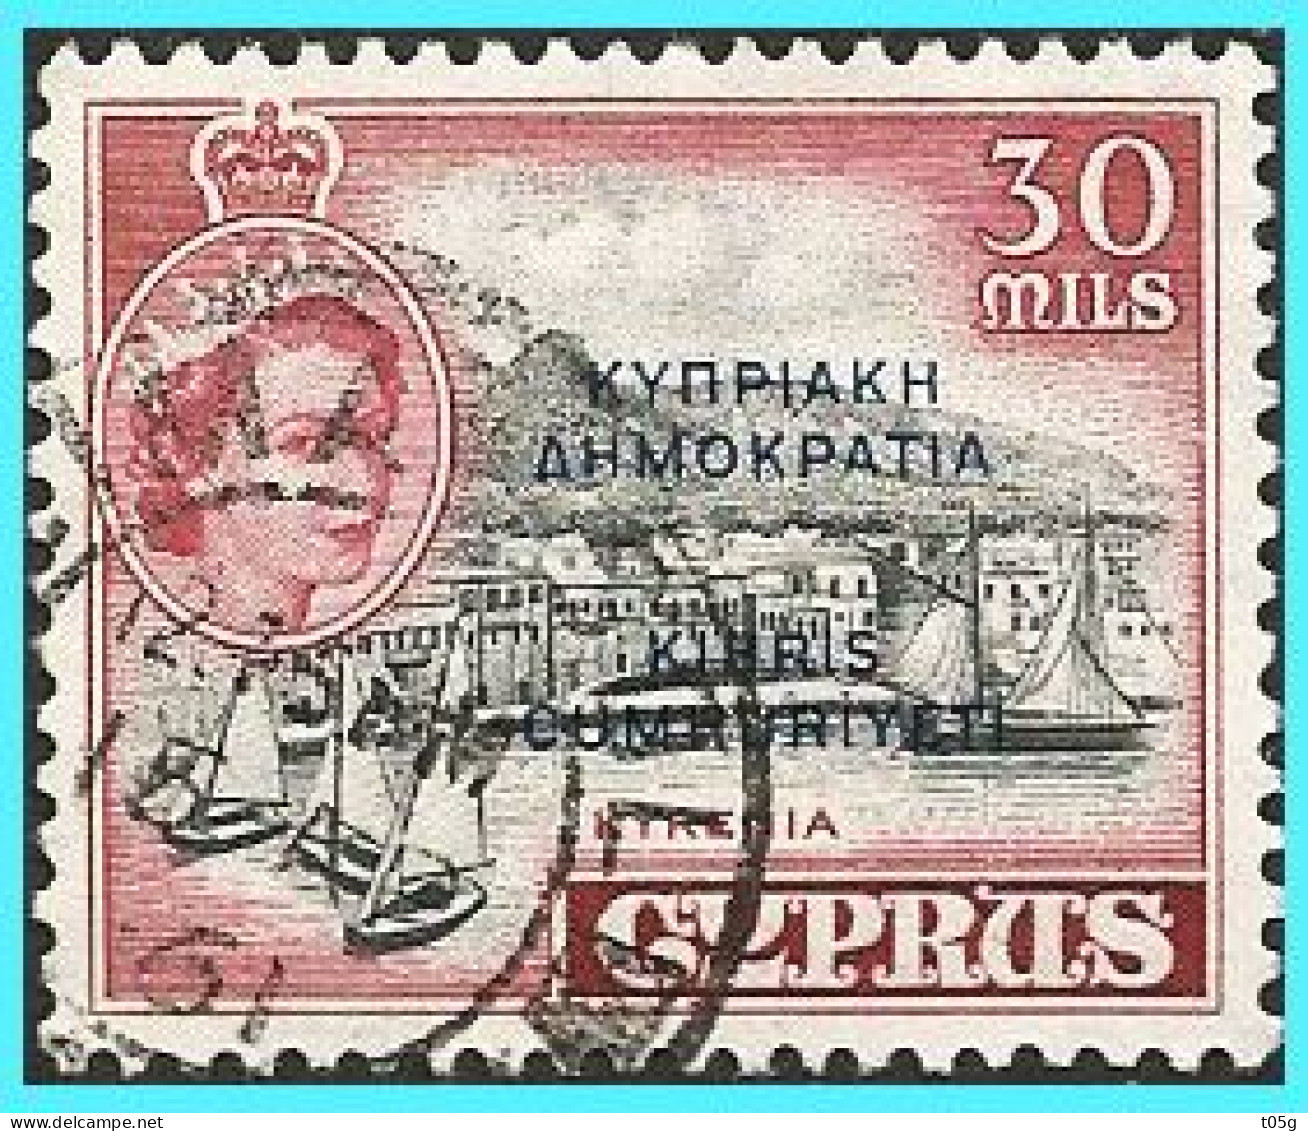 CYPRUS- GREECE- GRECE- HELLAS 1960: from set  Used - Used Stamps